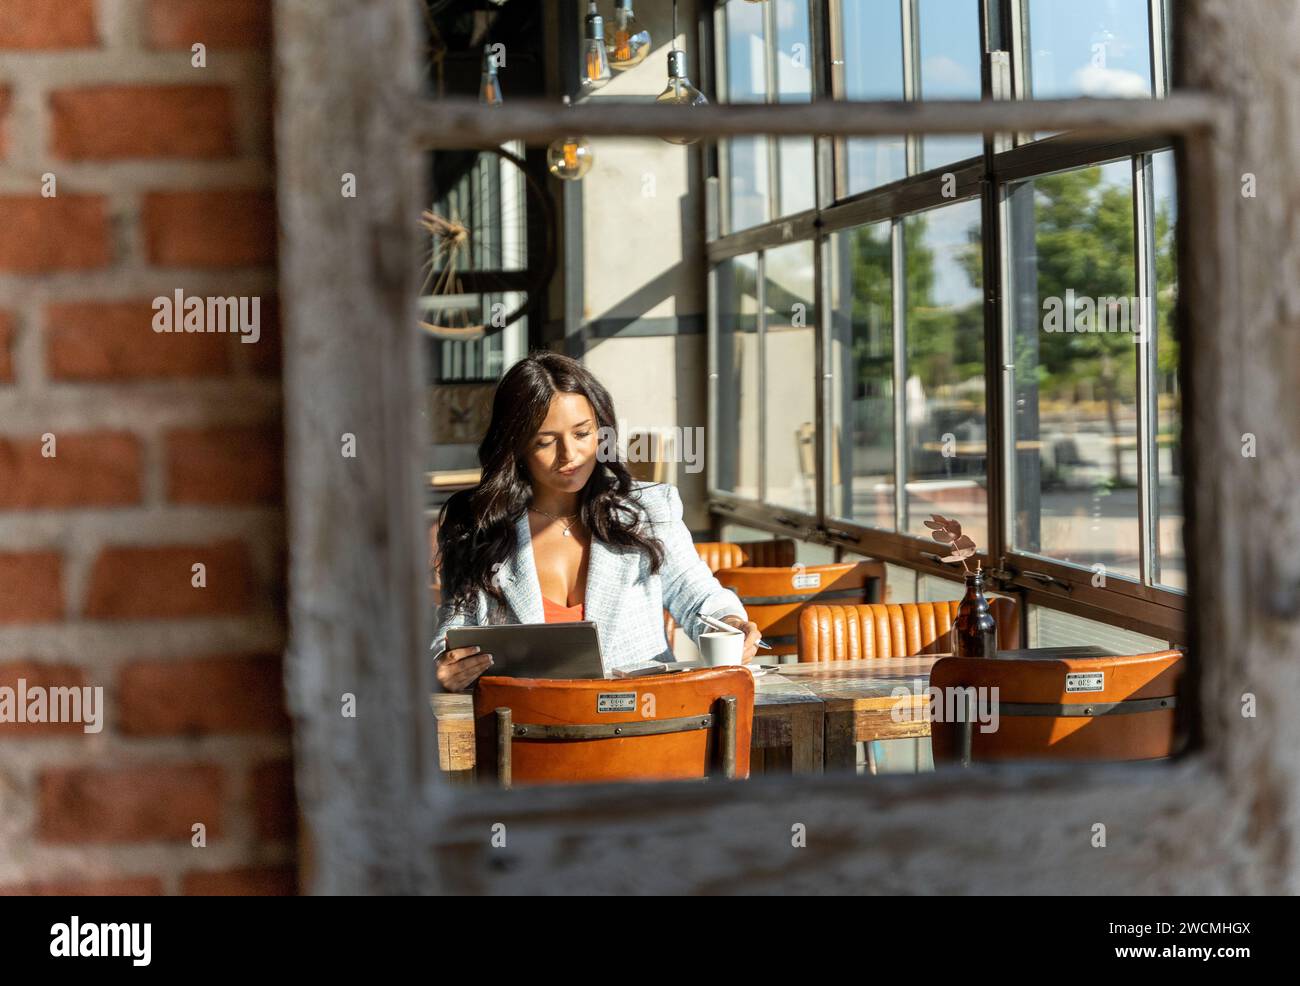 Reflection in the mirror of a woman using a digital tablet while sitting in a coffee shop. Technology concept. Stock Photo